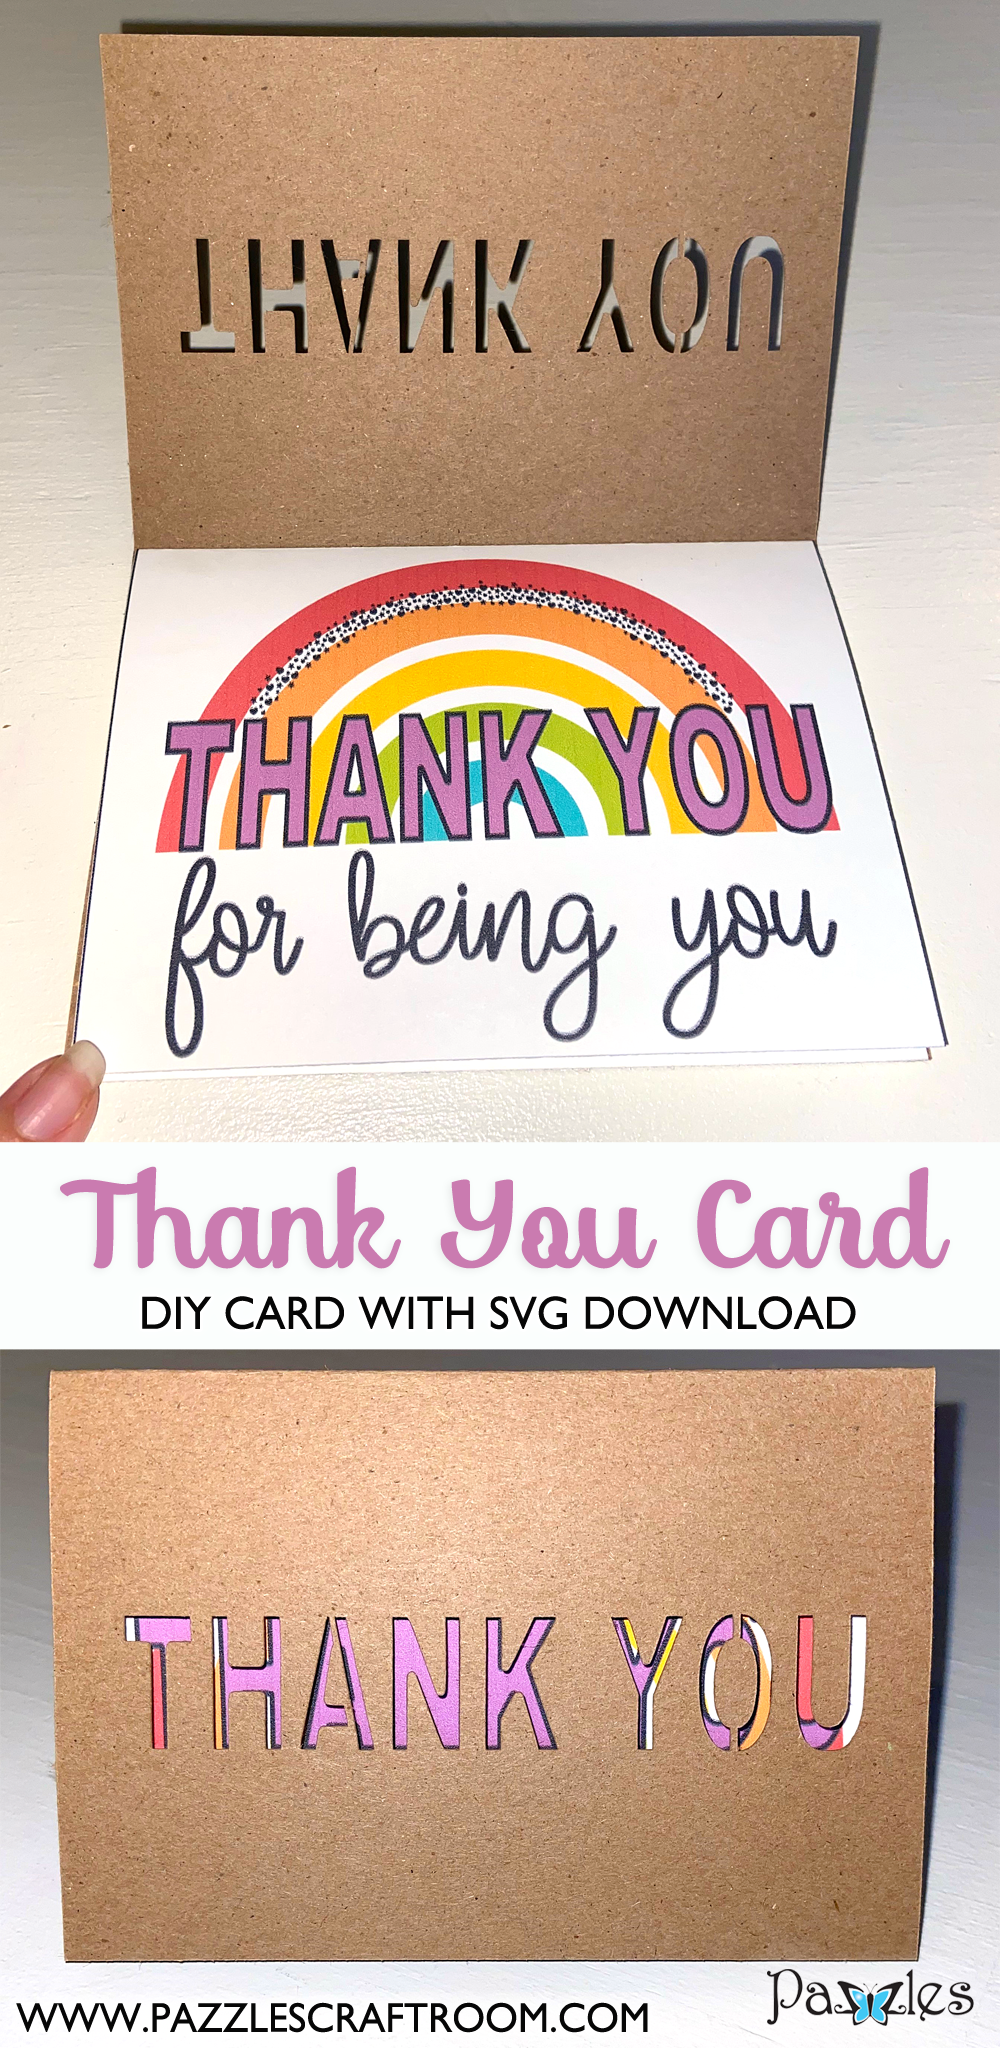 Pazzles Rainbow Thank You Card. Instant SVG download compatible with all major electronic cutters including Pazzles Inspiration, Cricut, and Silhouette Cameo. Design by Sara Weber.